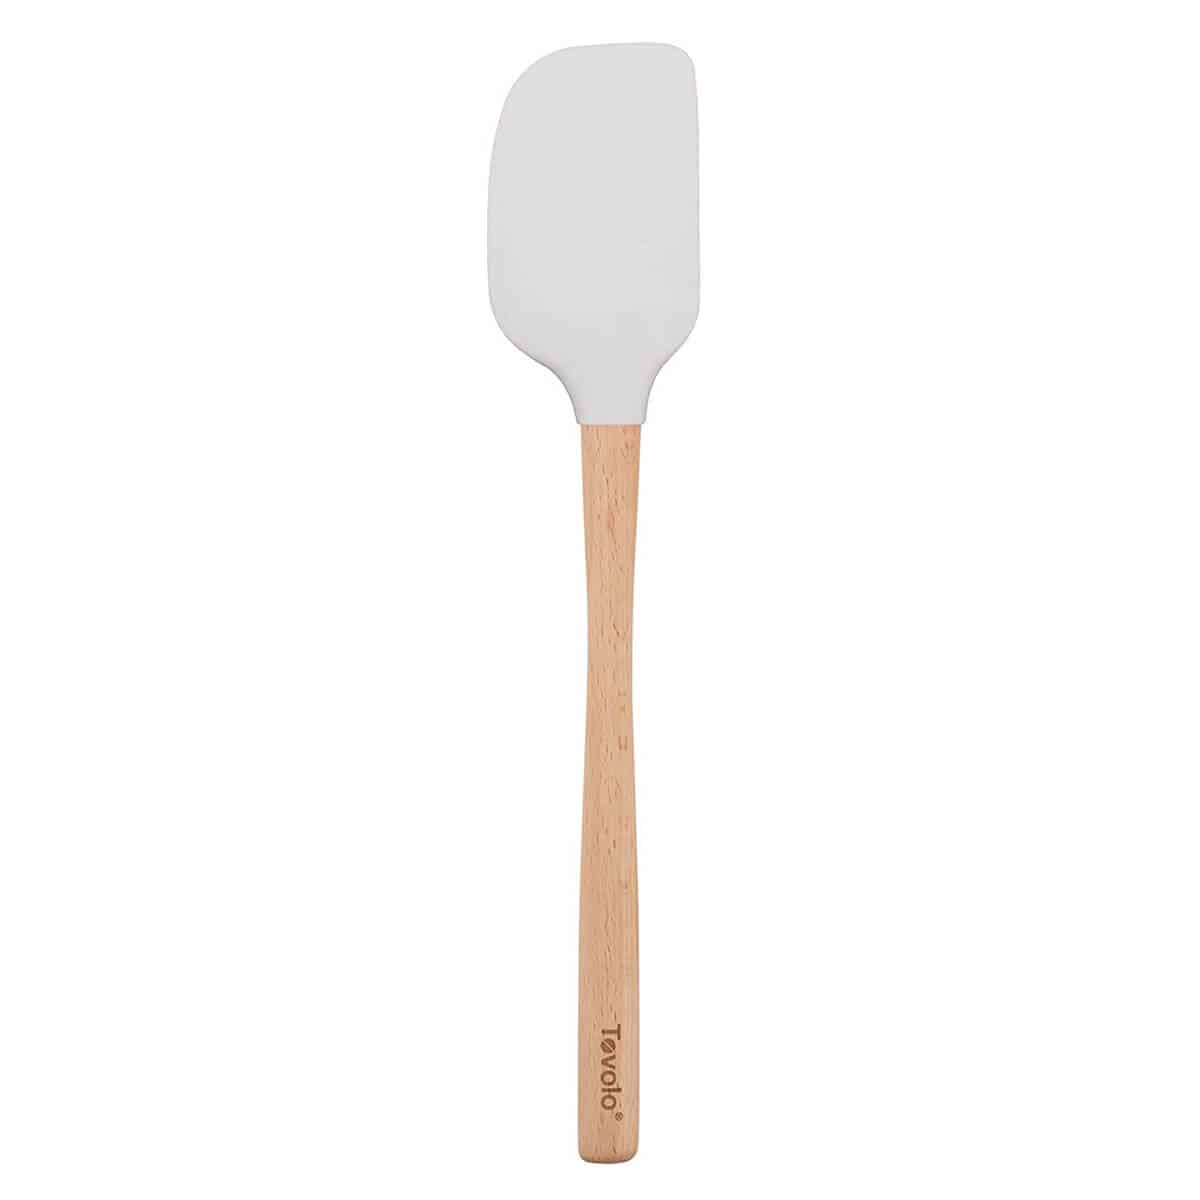 Tovolo Flex-Core Wood Handled Silicone Spatula Non-Stick, Heat-Resistant, BPA-Free, Dishwasher-Safe with Removable Angled Head.